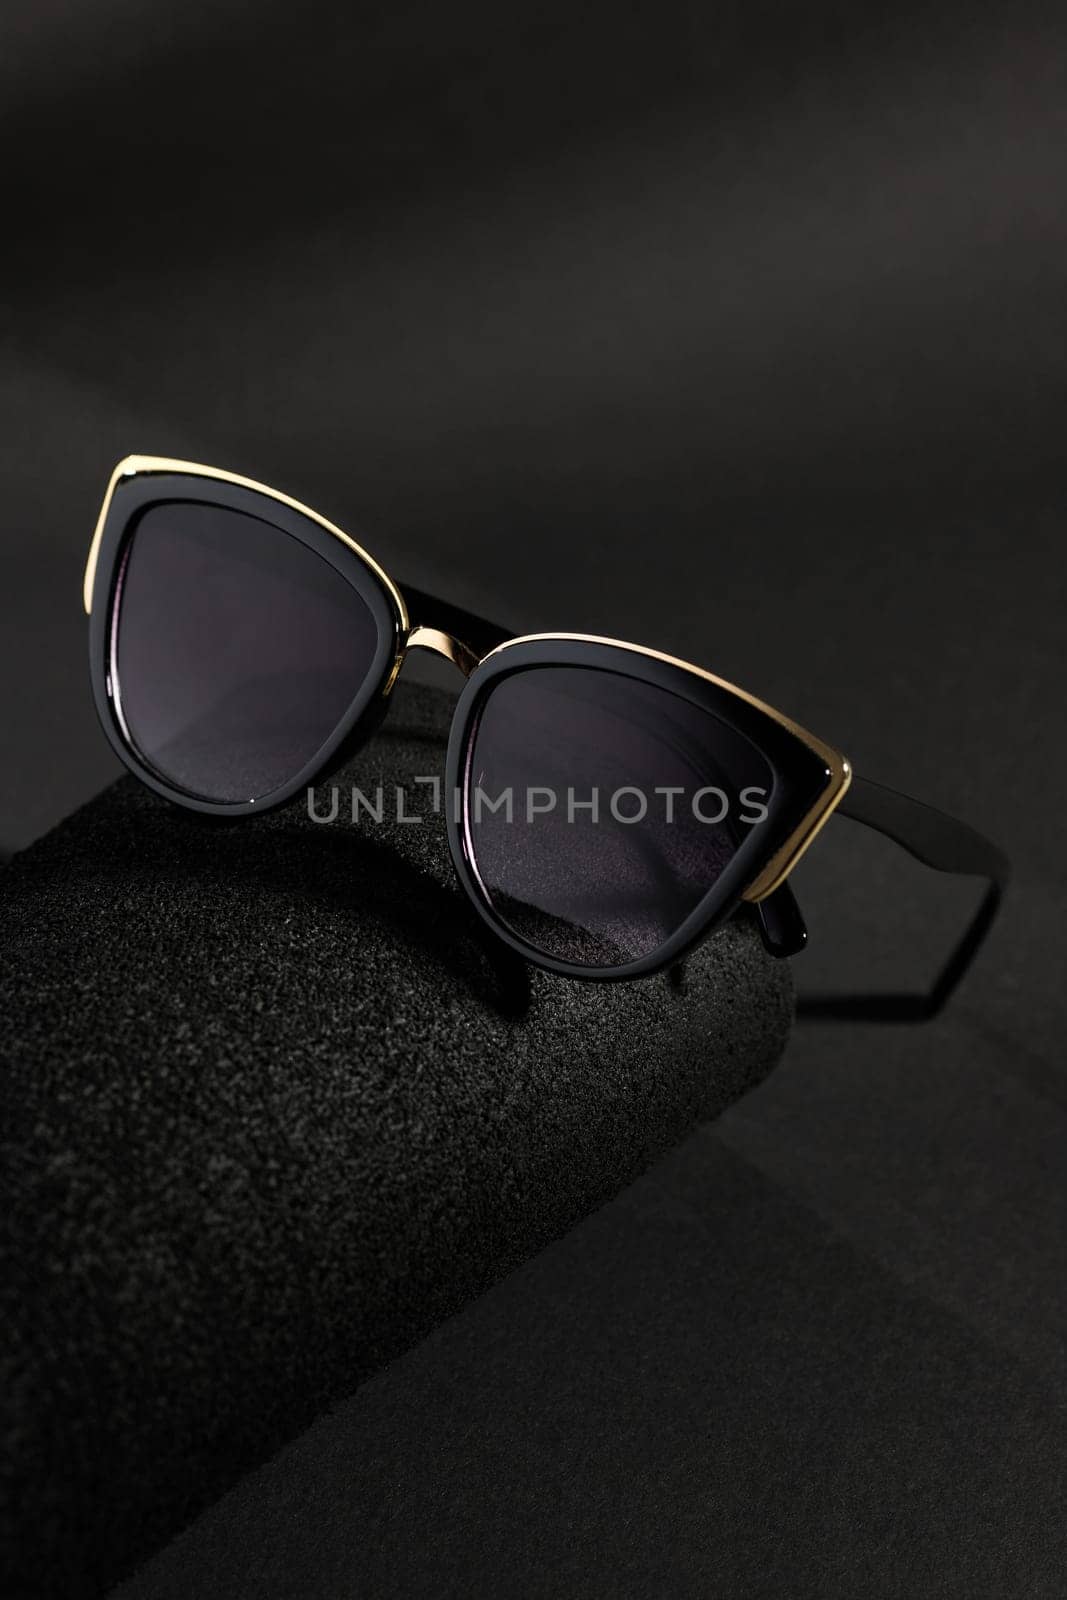 stylish women's sunglasses isolated on color paper background